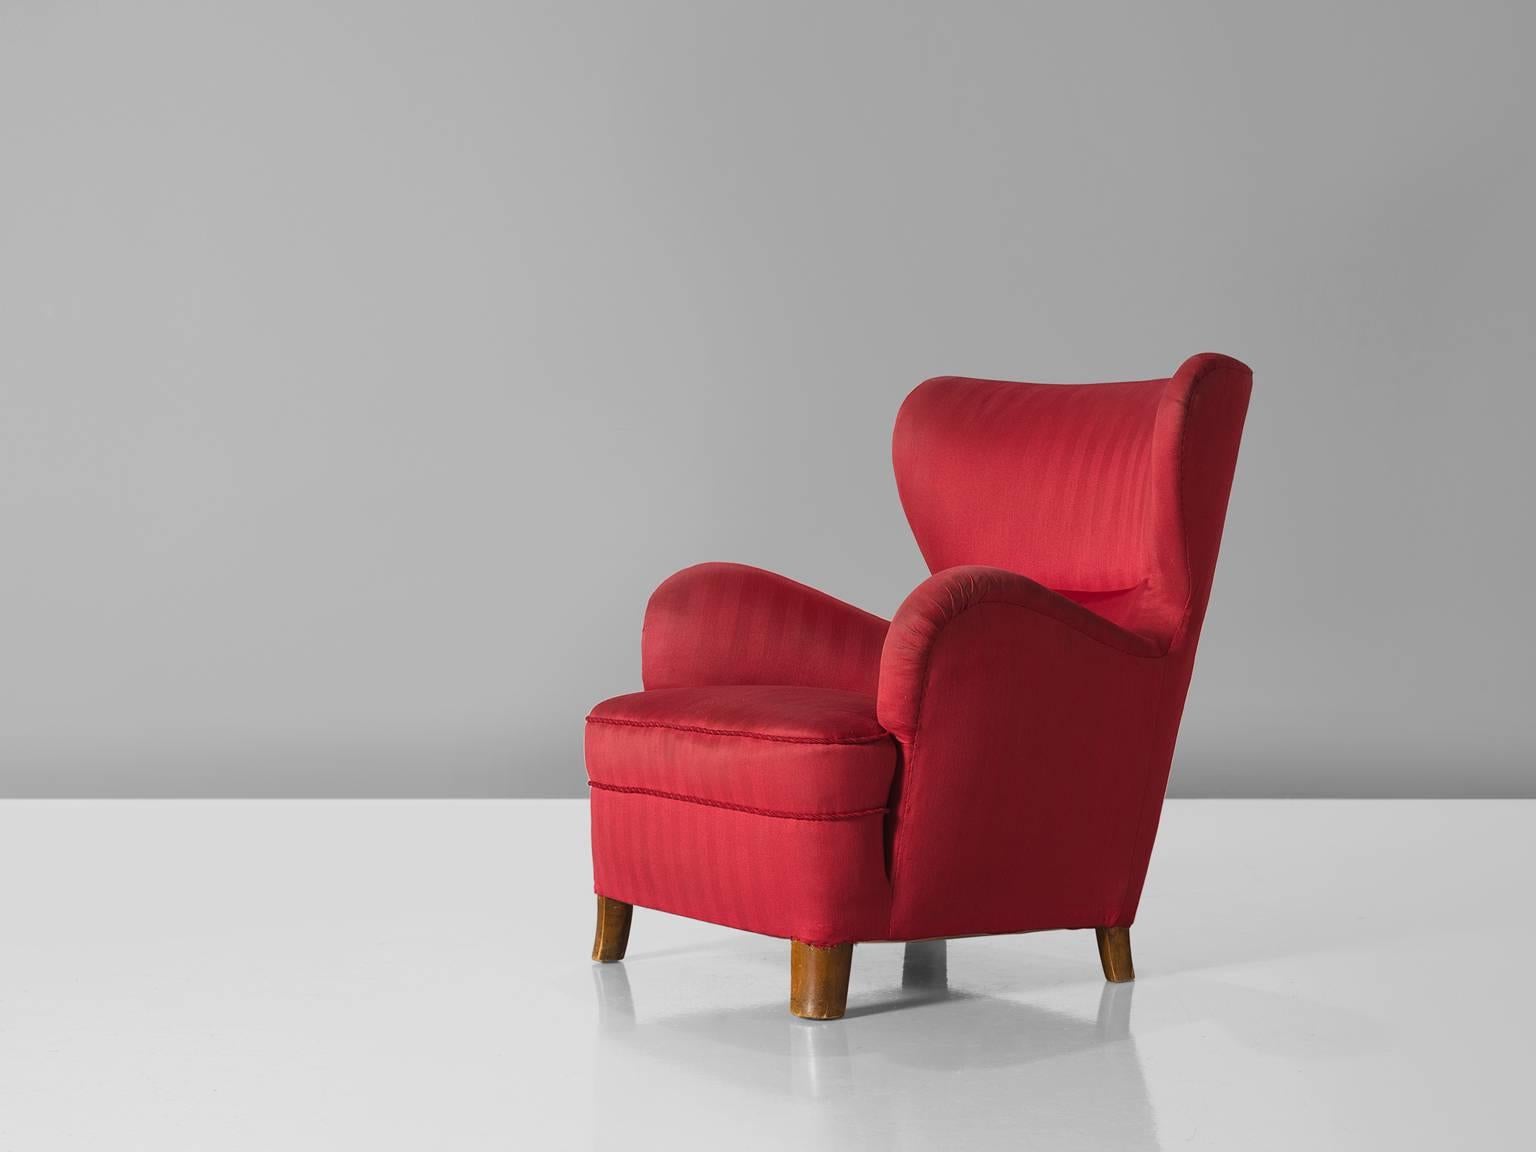 Easy chair, red fabric, beech, Denmark, 1950s

This lovely and comfortable Danish chair feature small wings and a curved armrest. Thanks to the voluptuous armrests, the chair gets a characteristic, fun shape. This bulky look is counterbalanced by